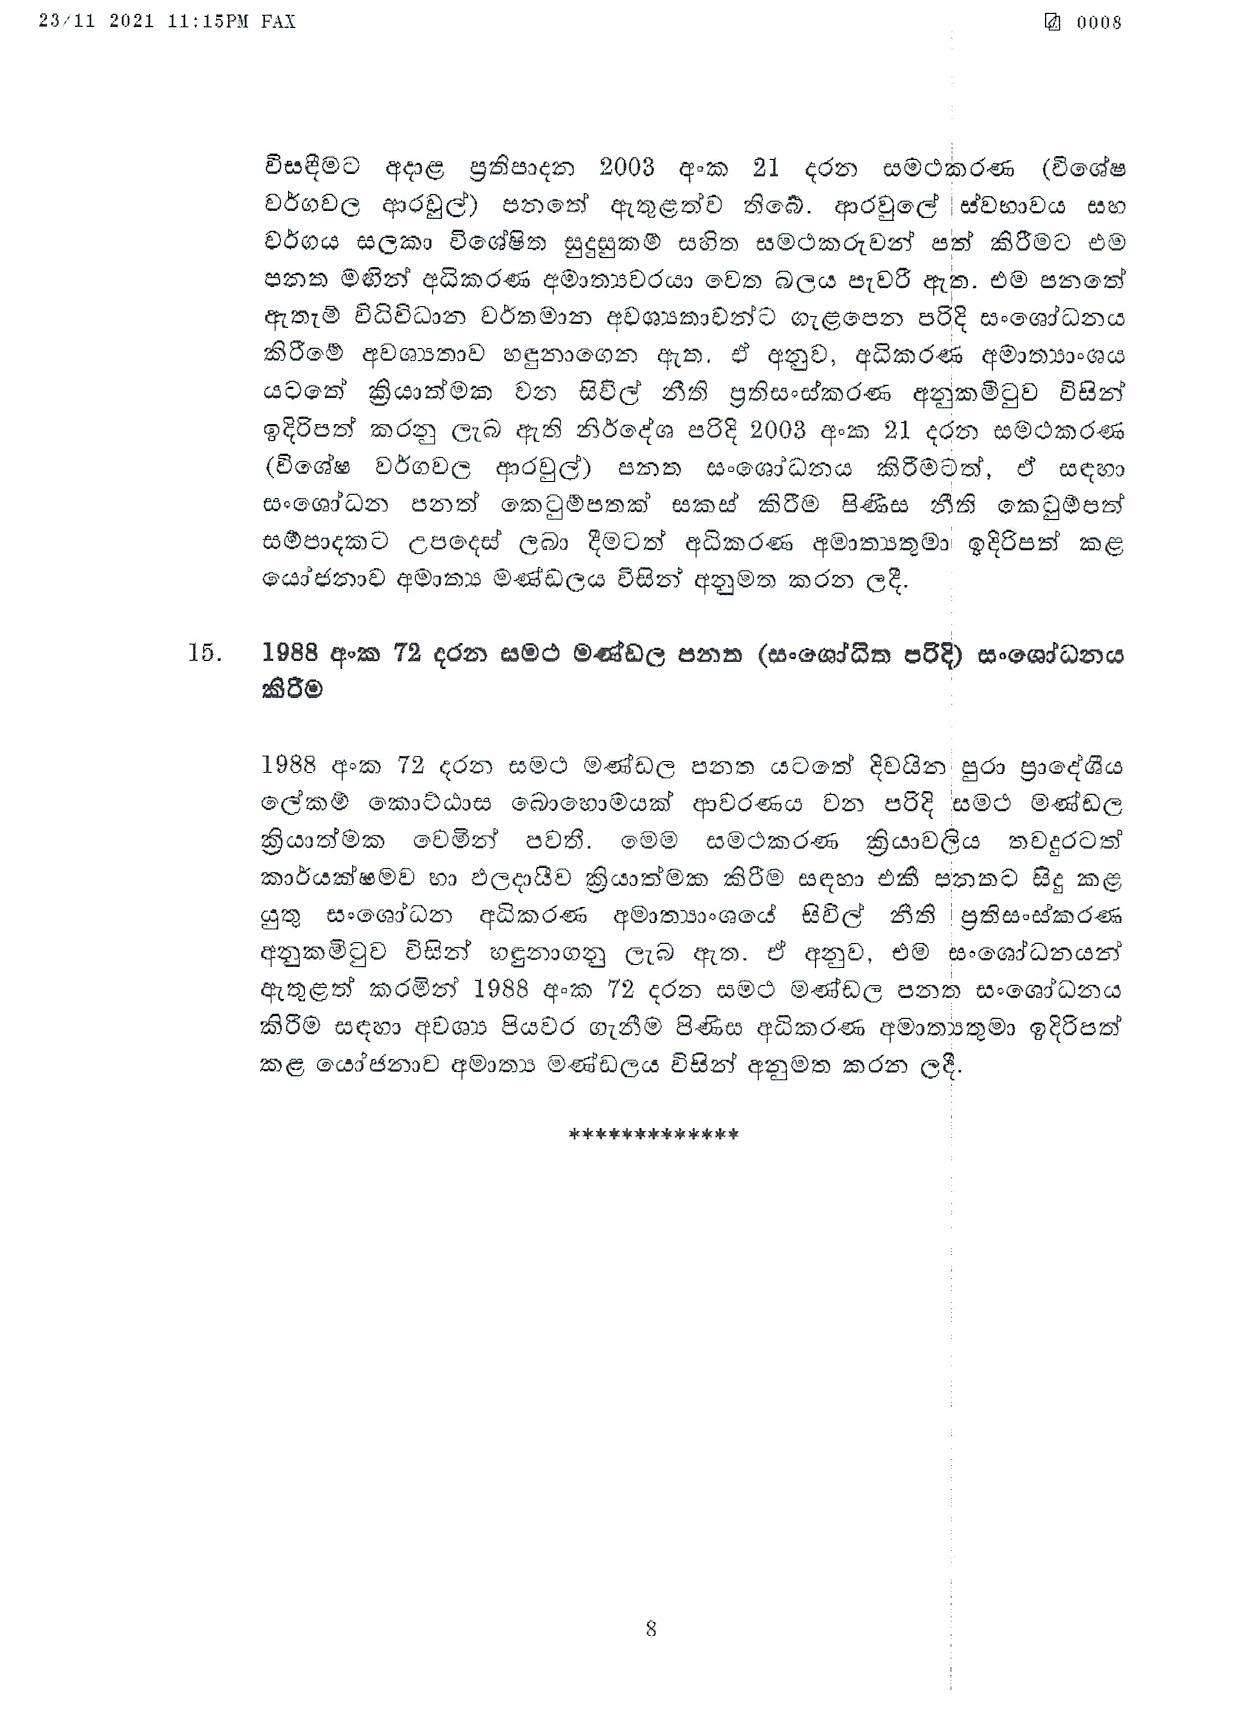 Cabinet Decision on 23.11.2021 page 008